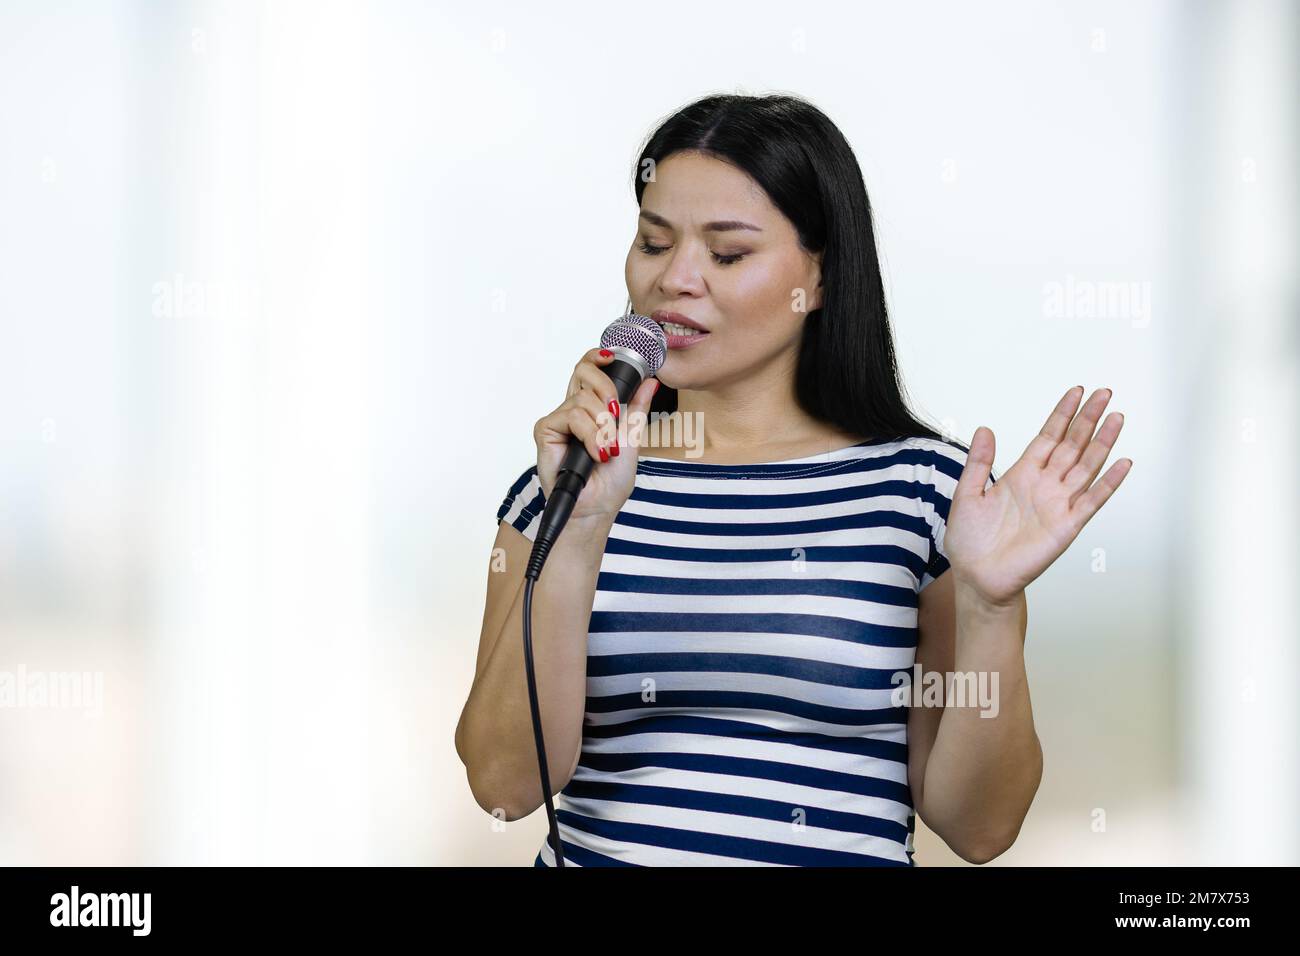 Young asianwoman is singing a song in a microphone standing indoors. Blurred bright background. Stock Photo